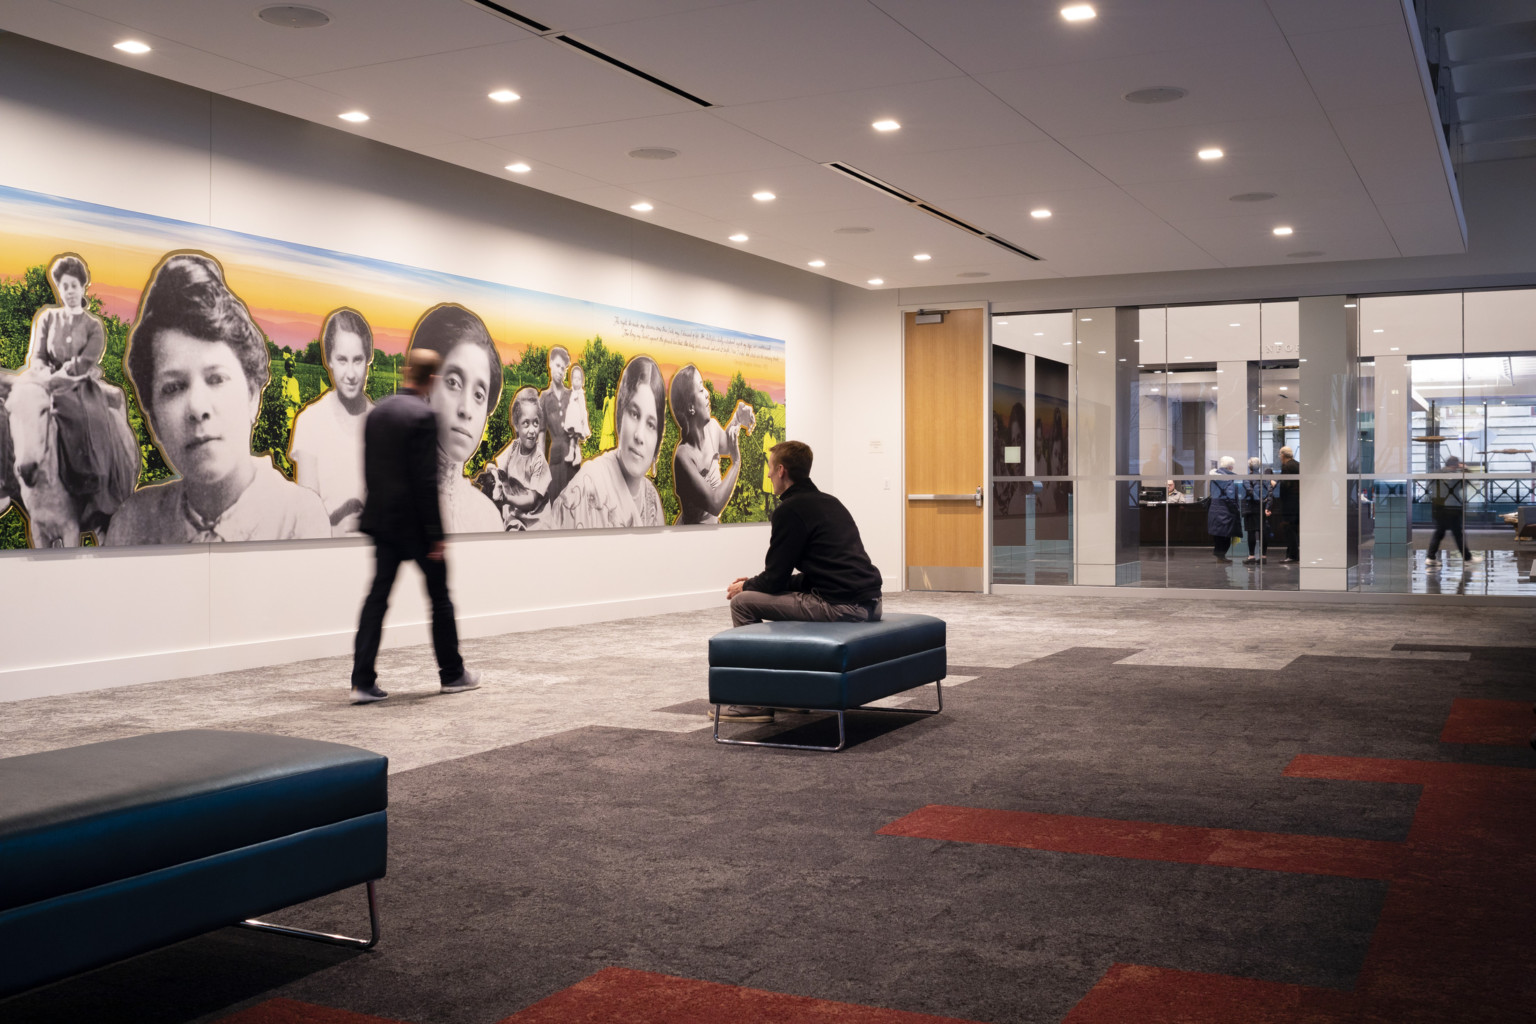 First floor event space with geometric carpet, a man sits looking at a large colorful mural